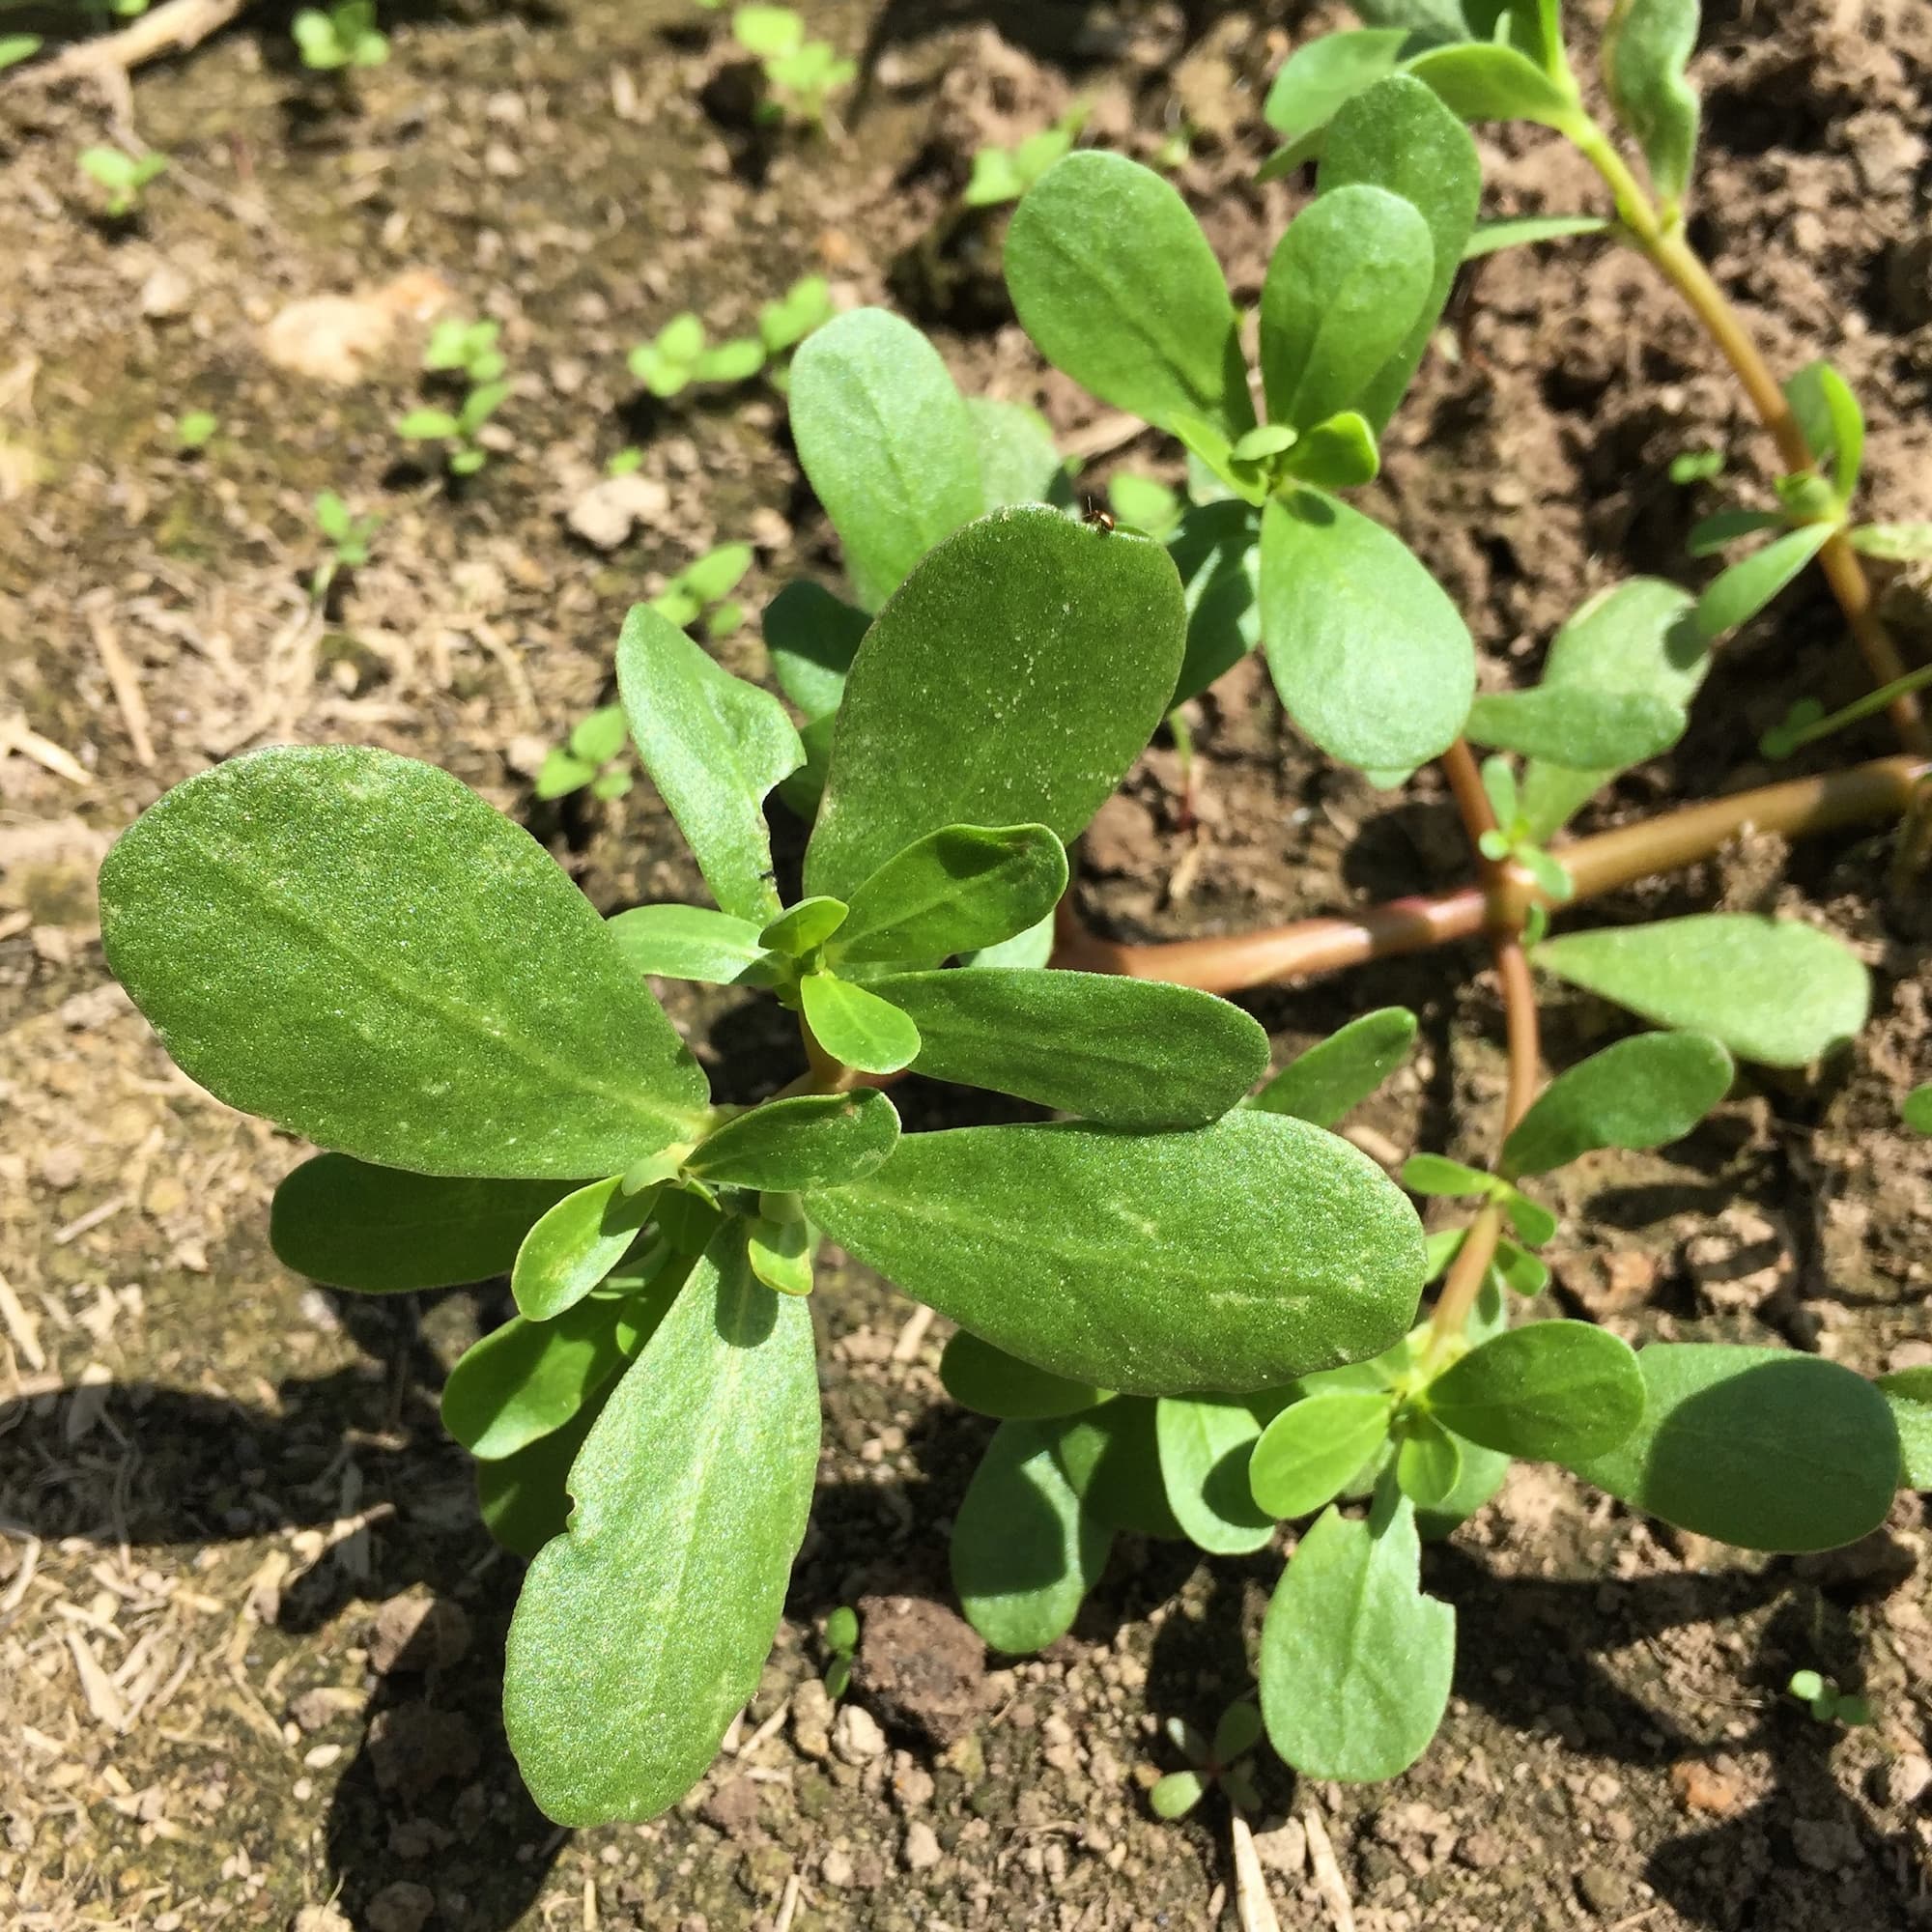 Purslane thrives in full sun and maximum summer heat, and loves to take over bare soil.